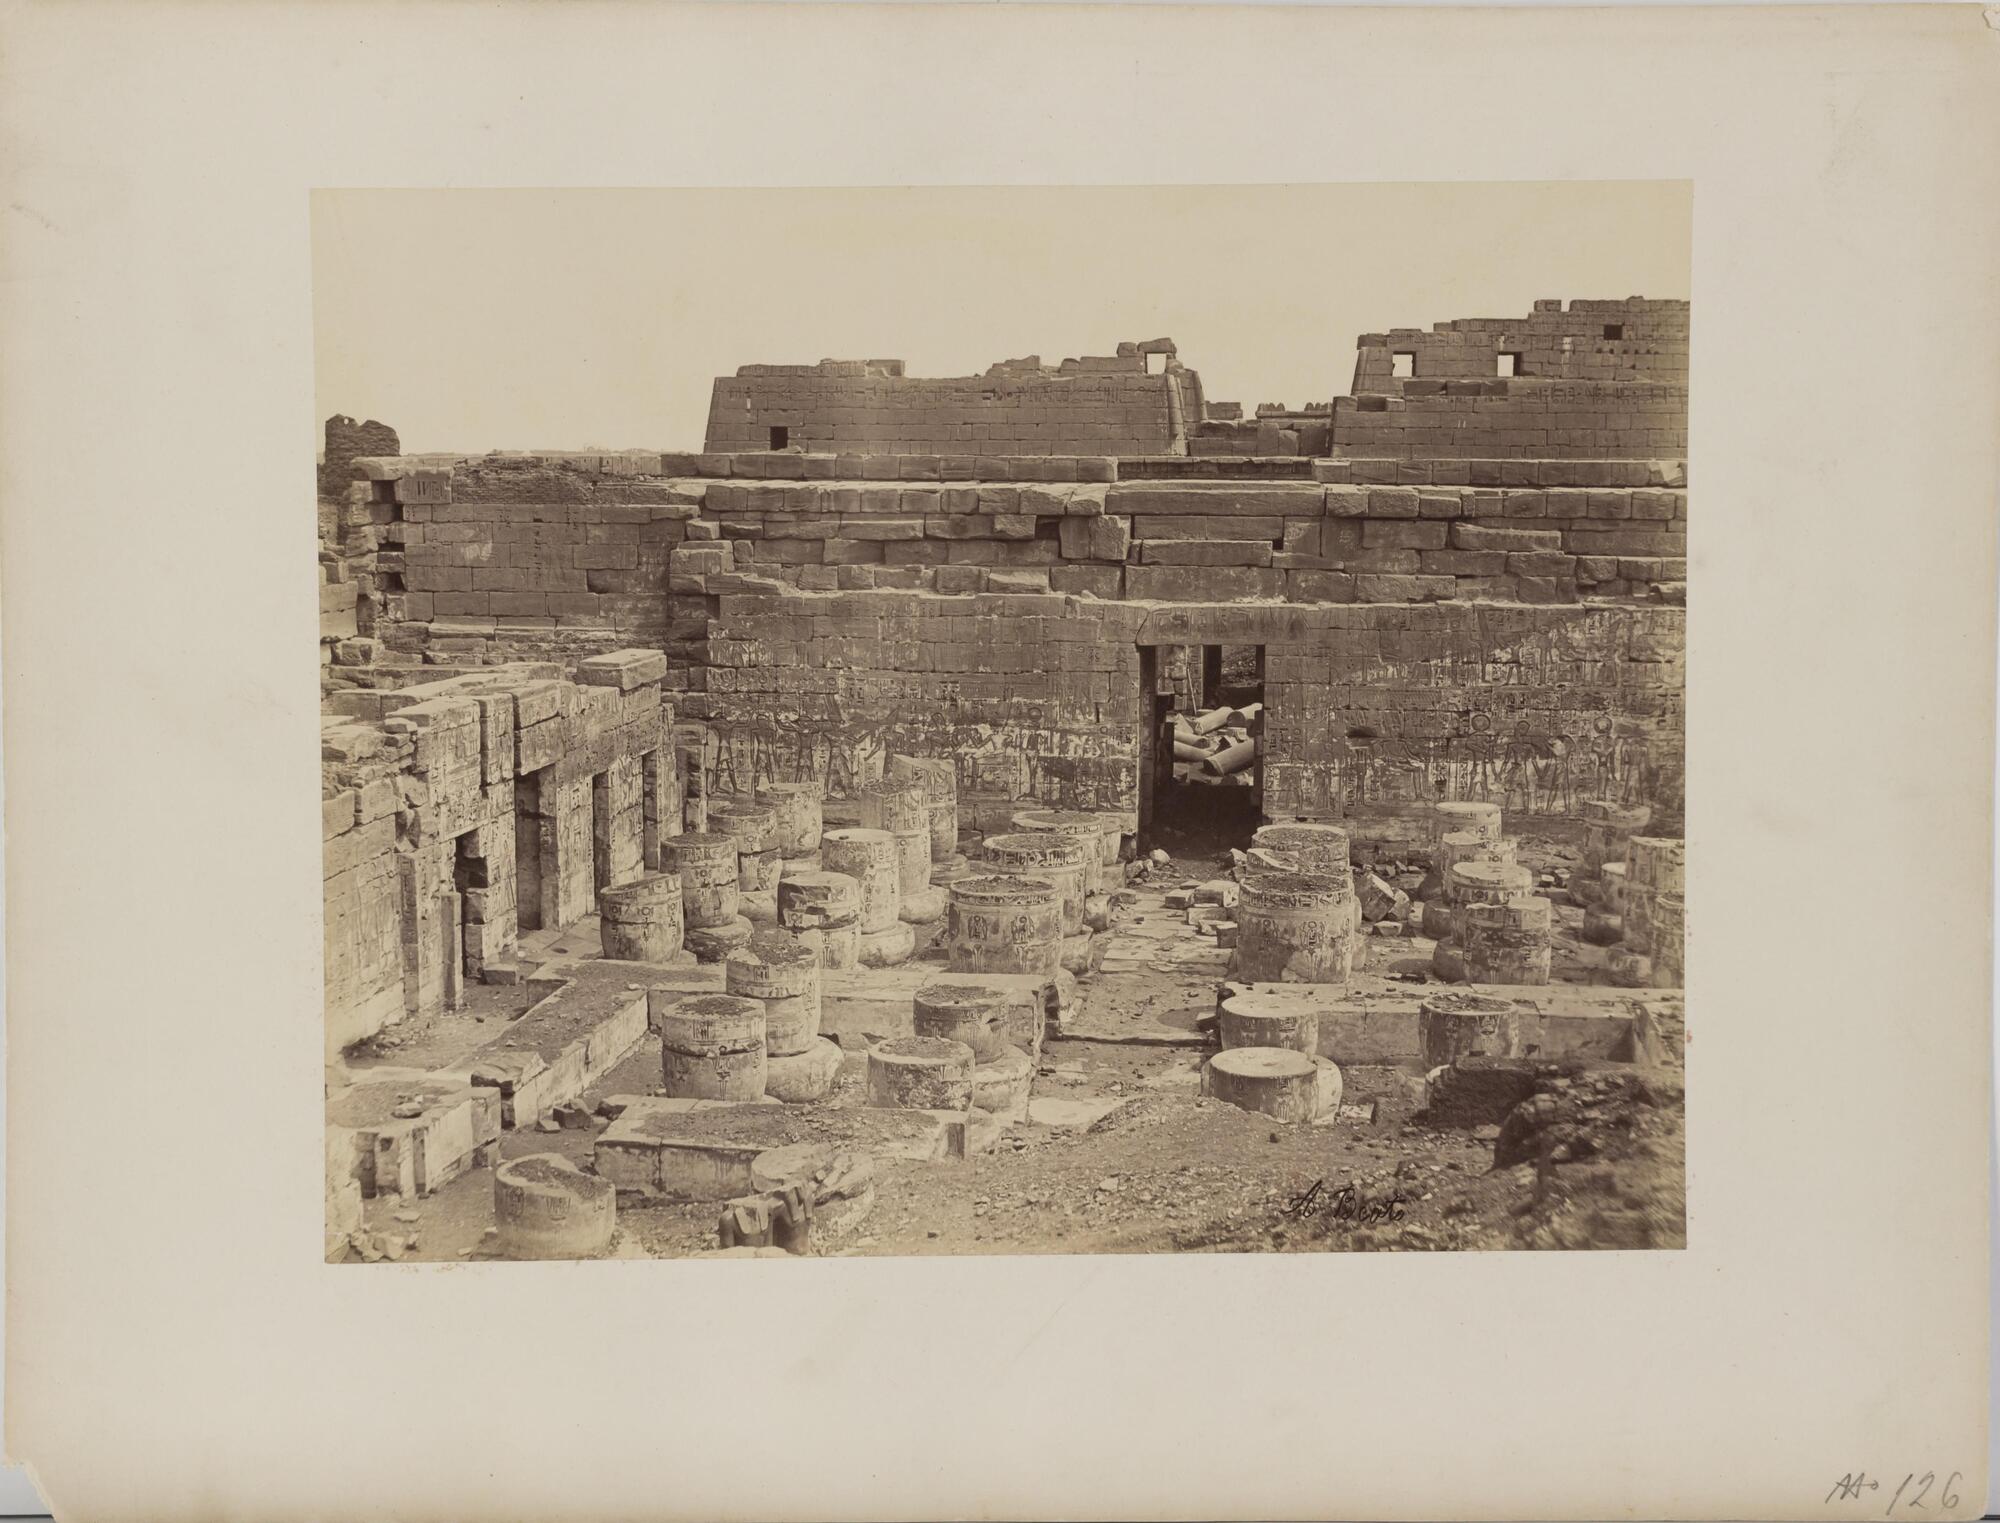 Overarching view of the interior courtyard of an Egyptian temple.